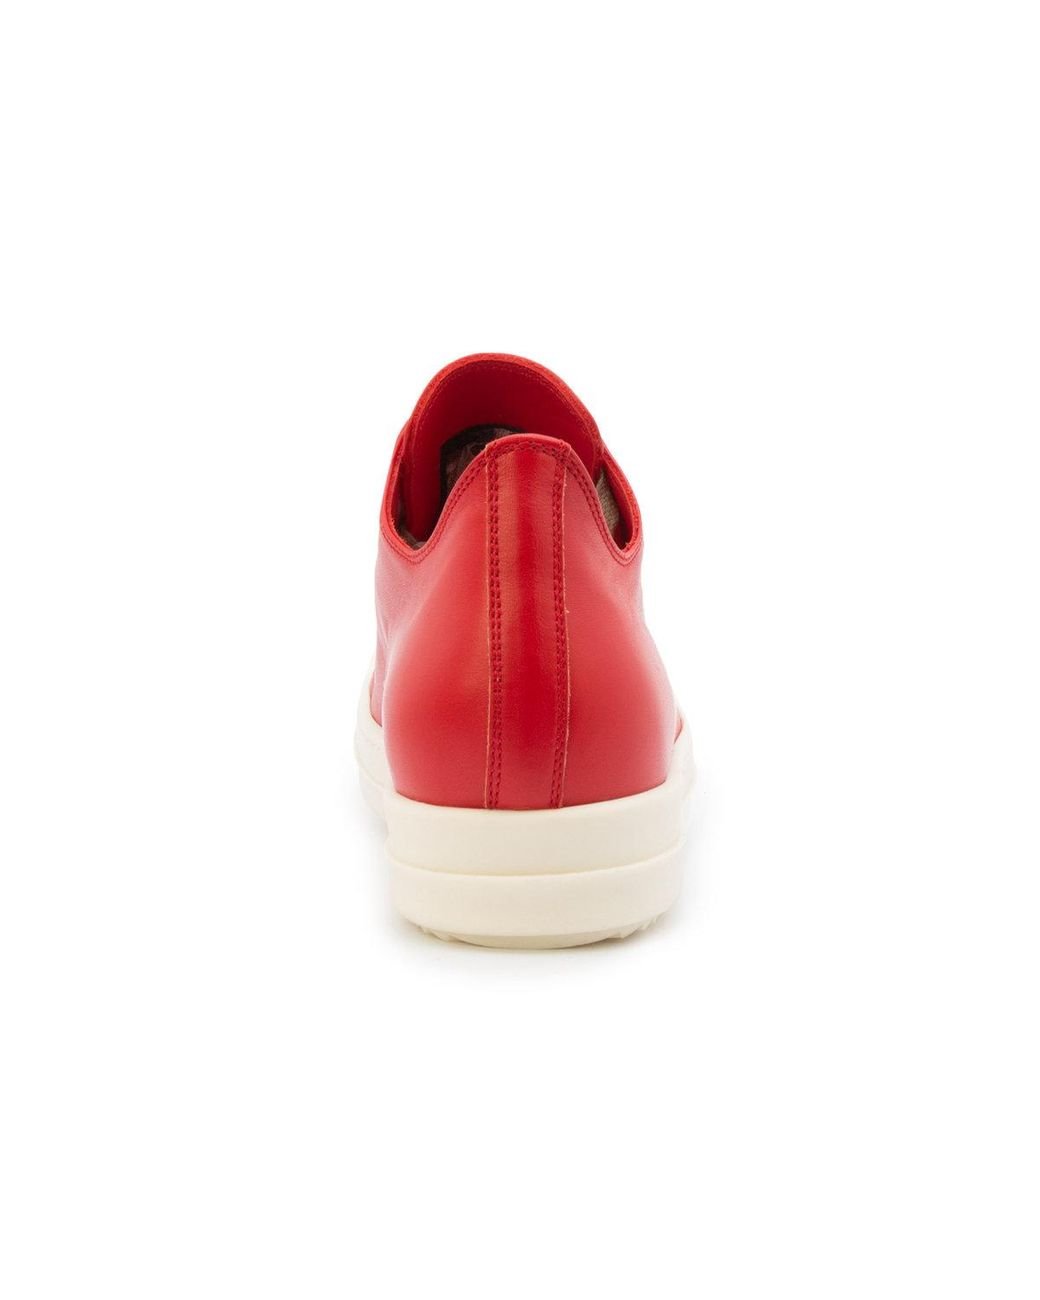 Rick Owens Size 35 2021 Red leather Ramones low top sneakers new